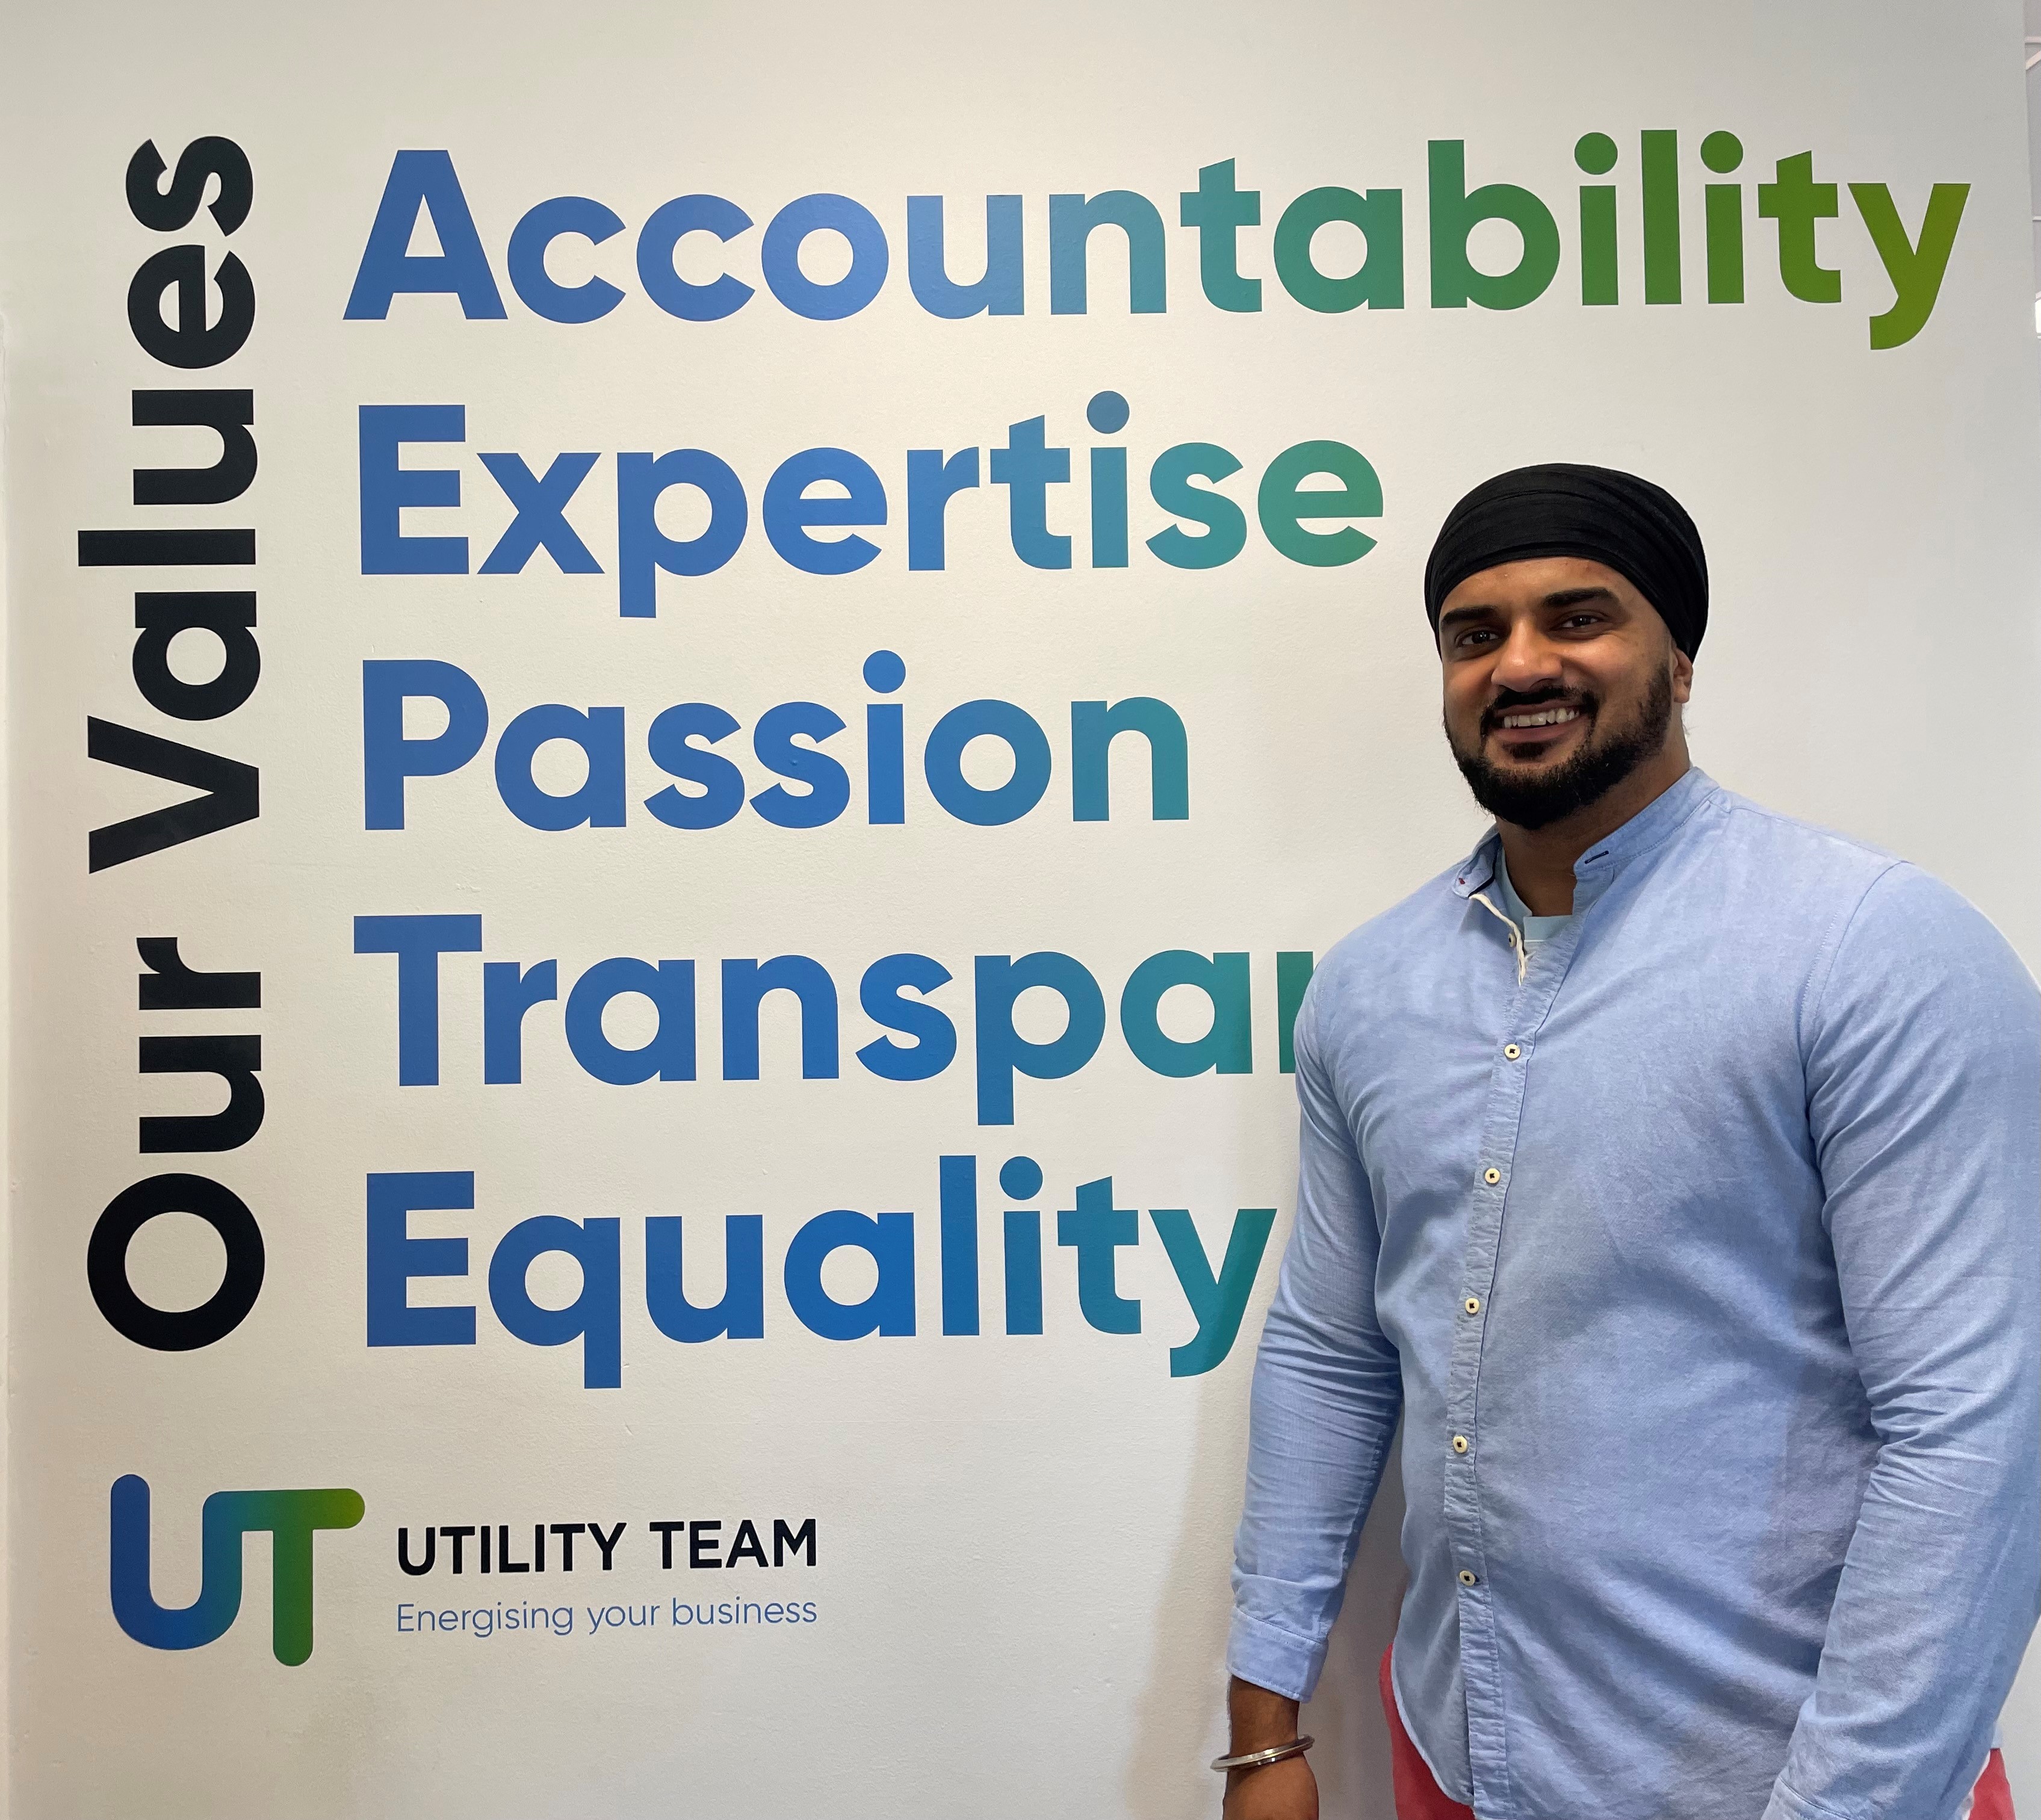 A day in the life of Surj Pandher, Operations Manager.